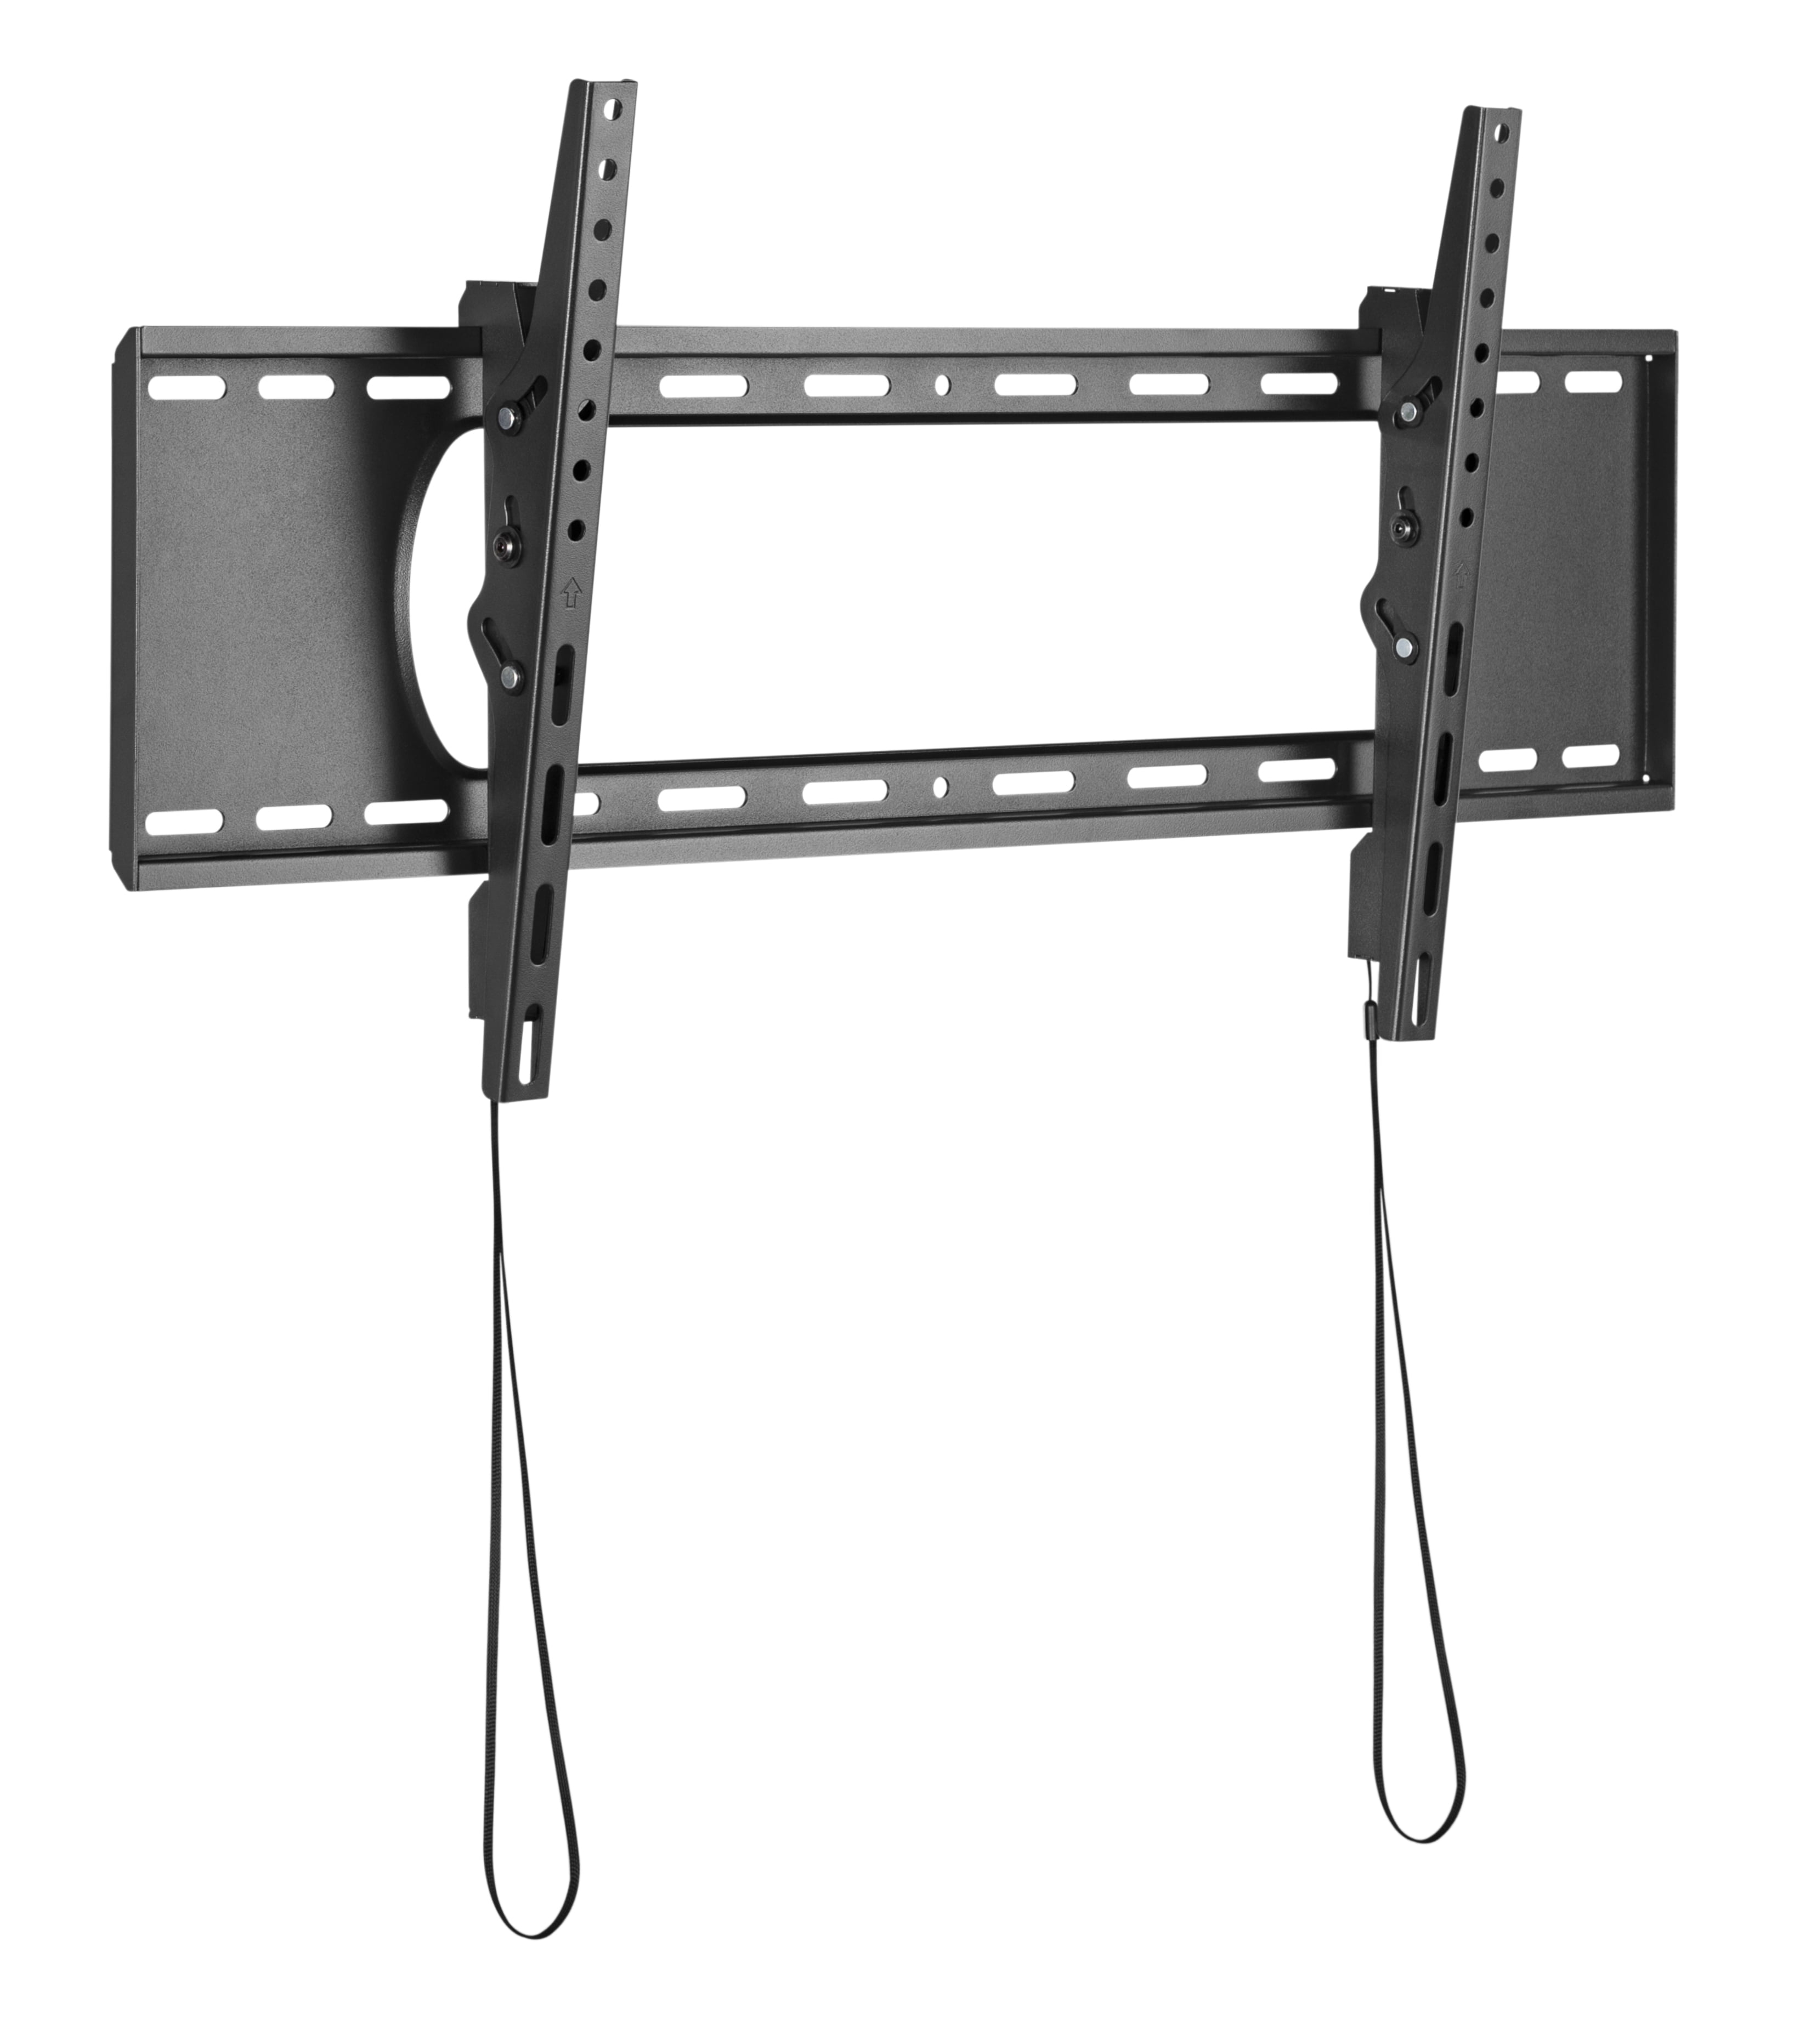 Proht Heavy Duty Tilt Tv Wall Mount For 43 Inches Up To 90 Inches